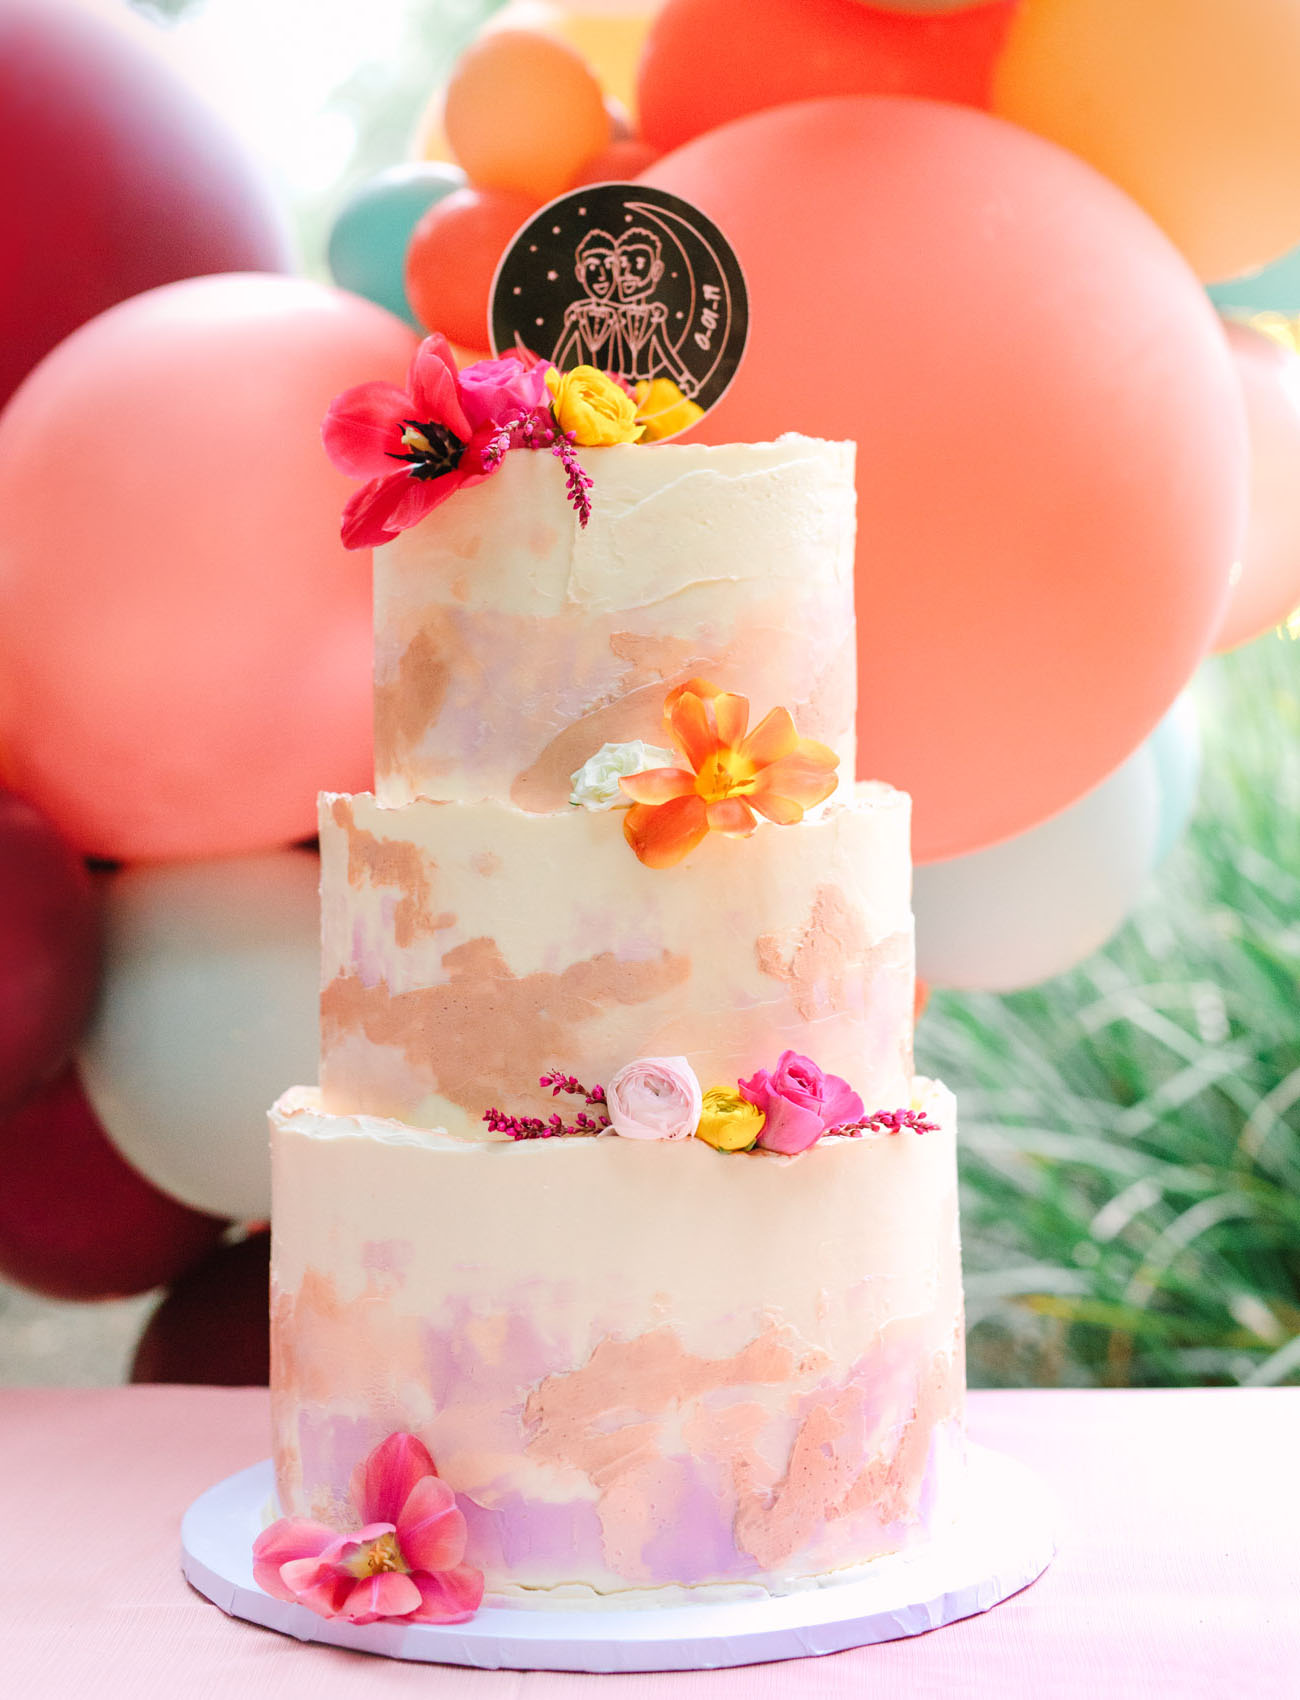 The wedding cake was a bright watercolor one, with brushstrokes and bright blooms